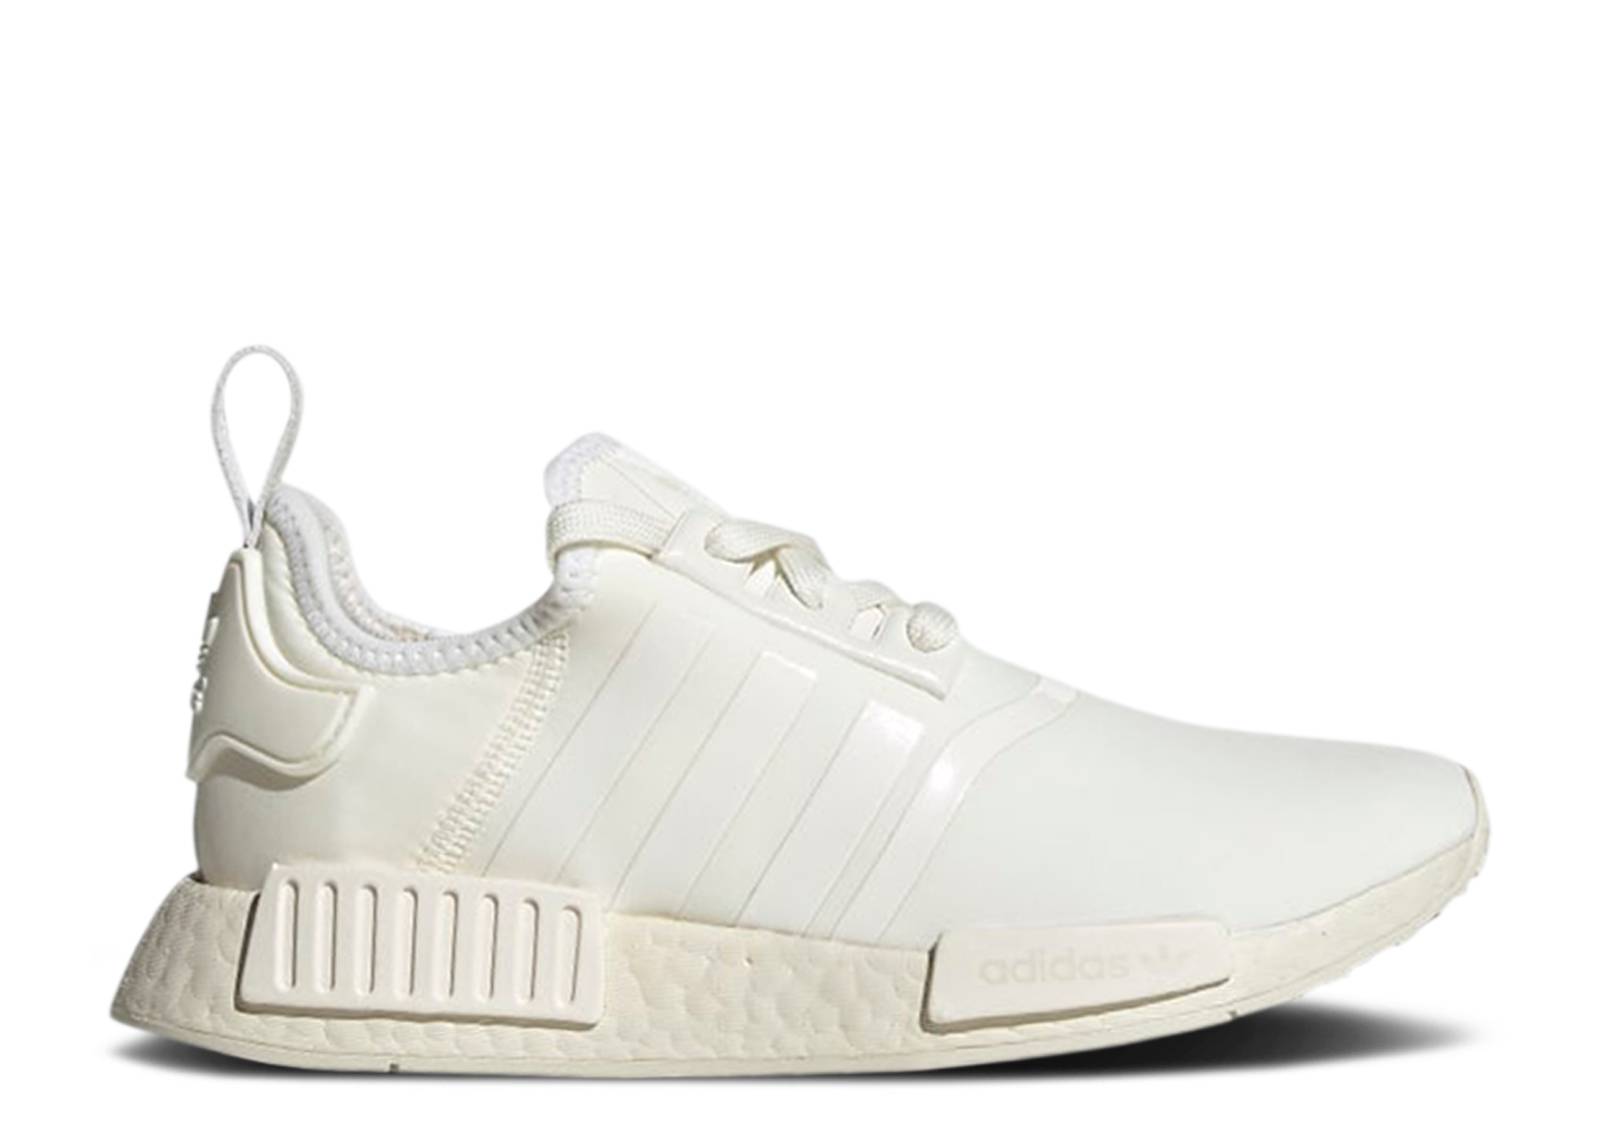 Wmns NMD_R1 'Off White Sand'